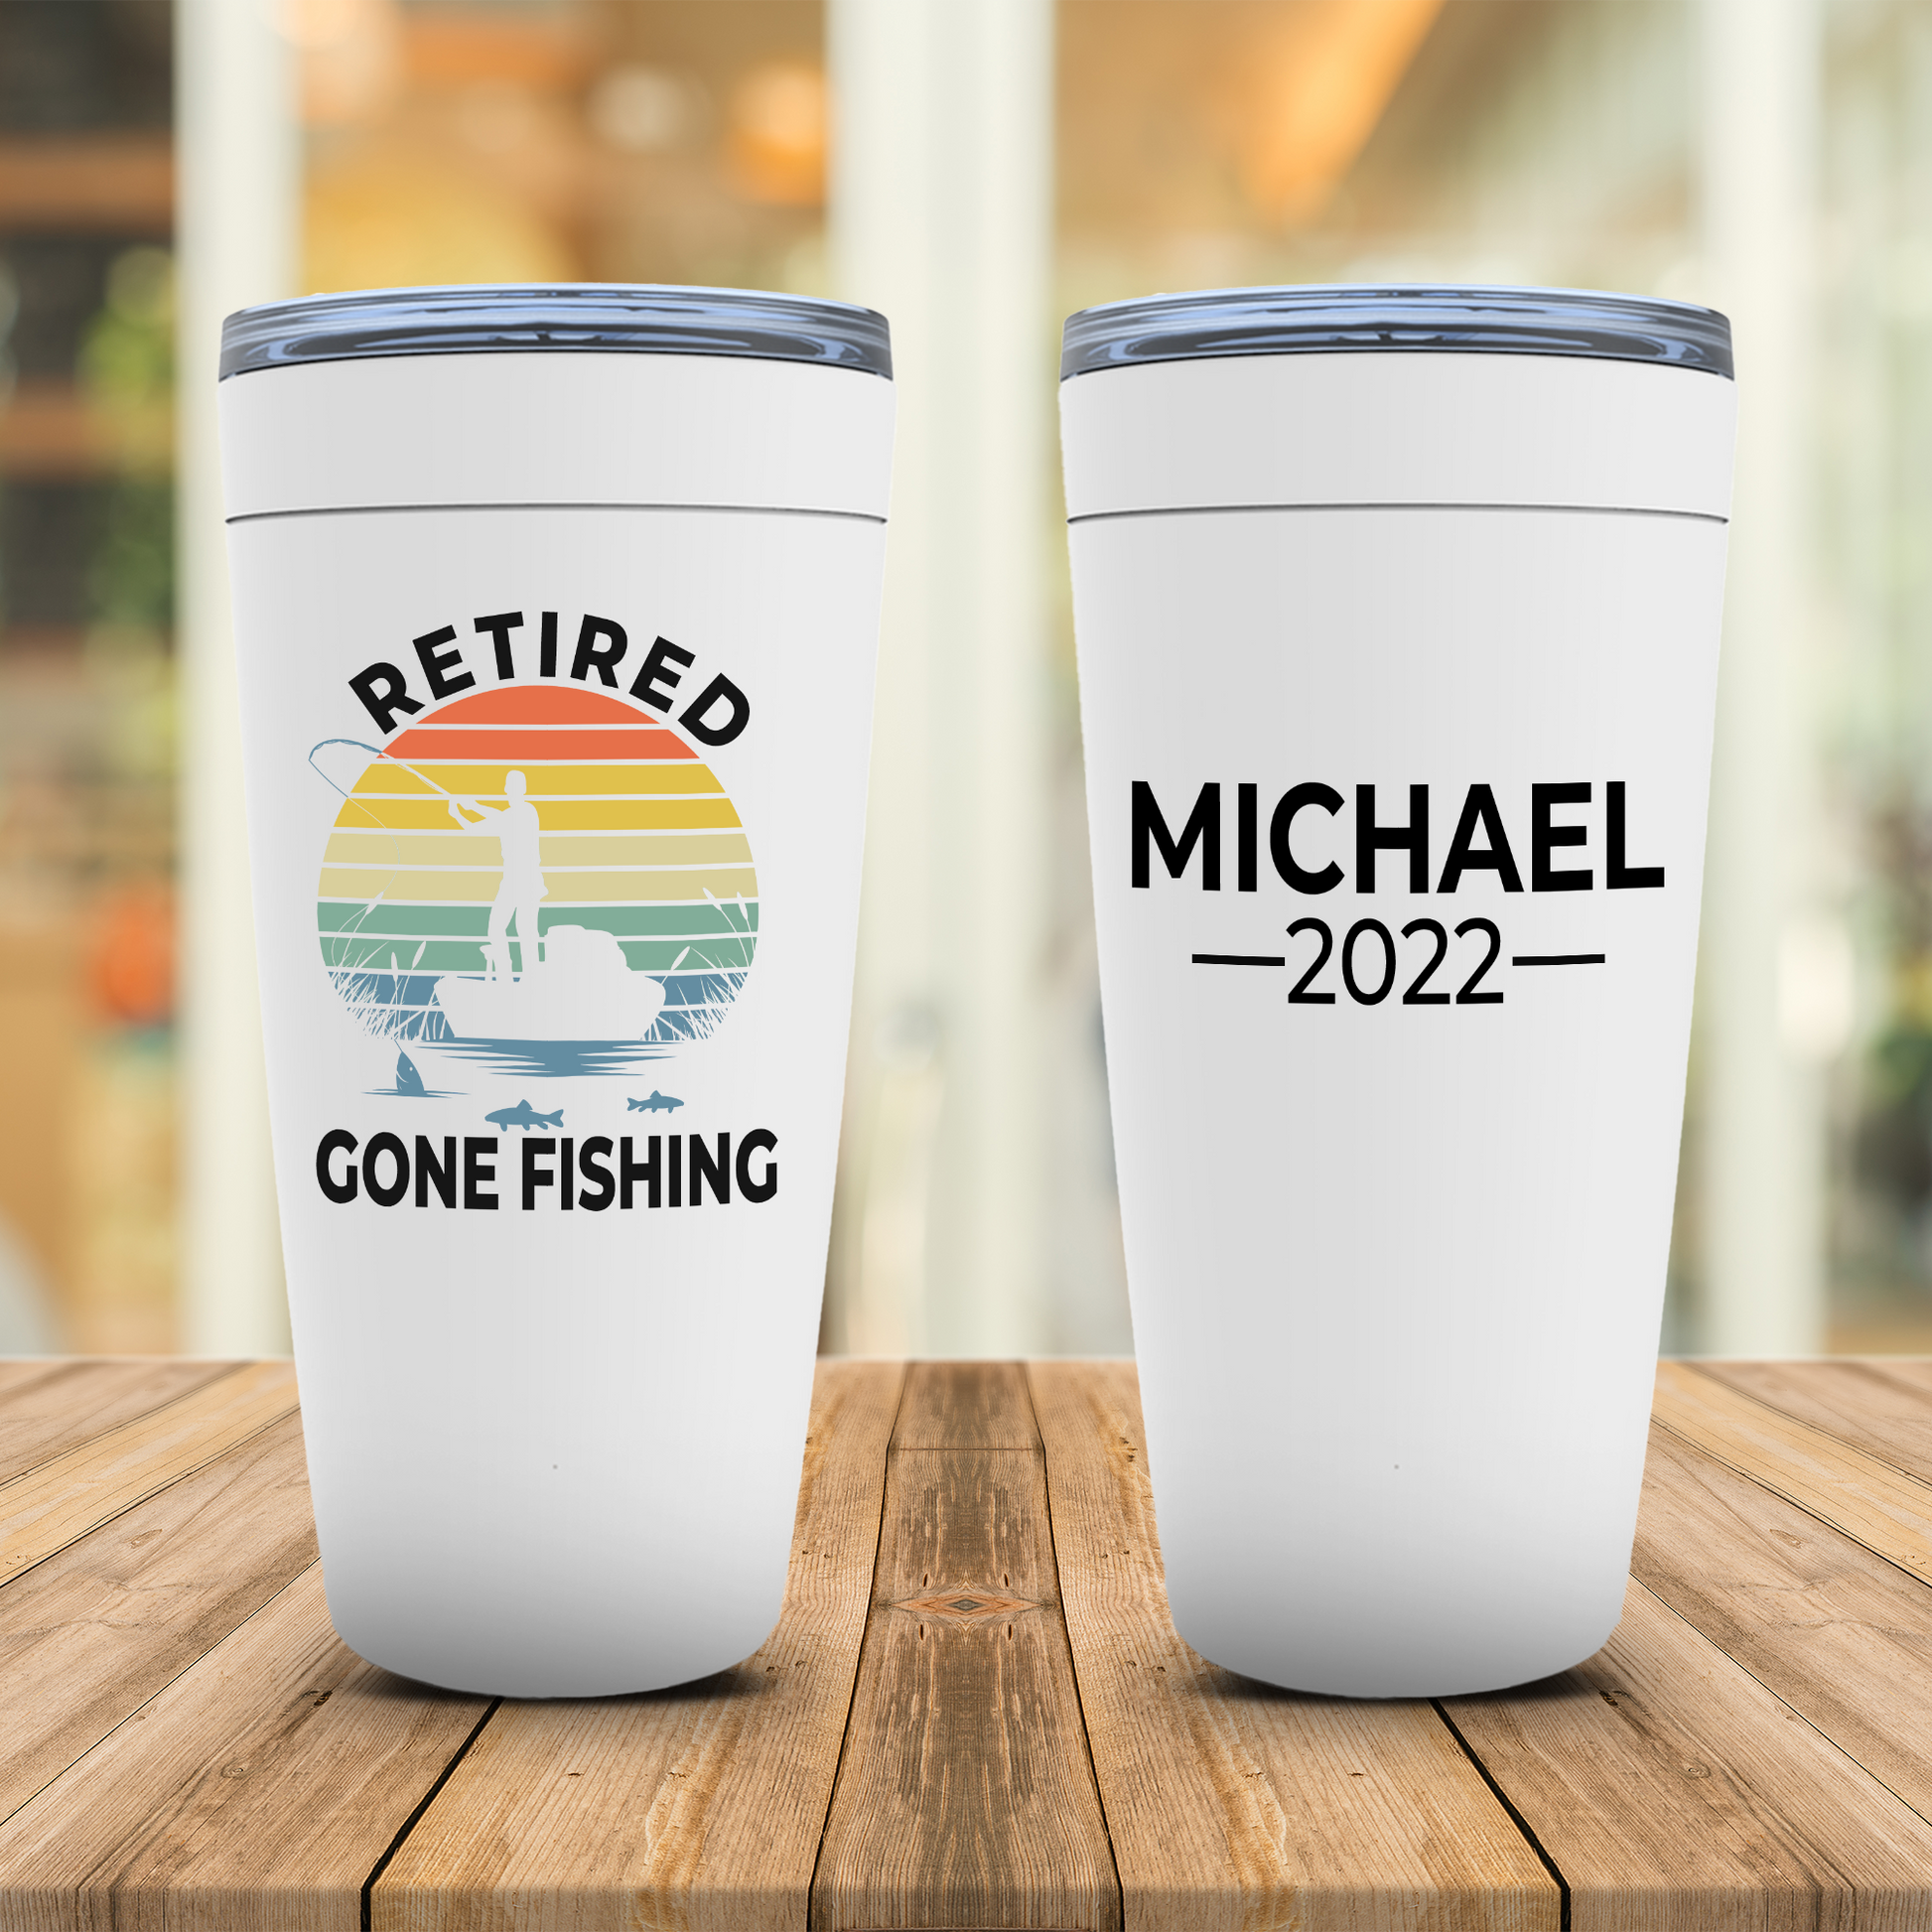 Retirement Gift for Men Fishing, Retired 2022 Cup Personalized, Dad,  Grandpa, Husband, Uncle Retirement Party Present, Funny Fisherman Cup from  Dancing Canary